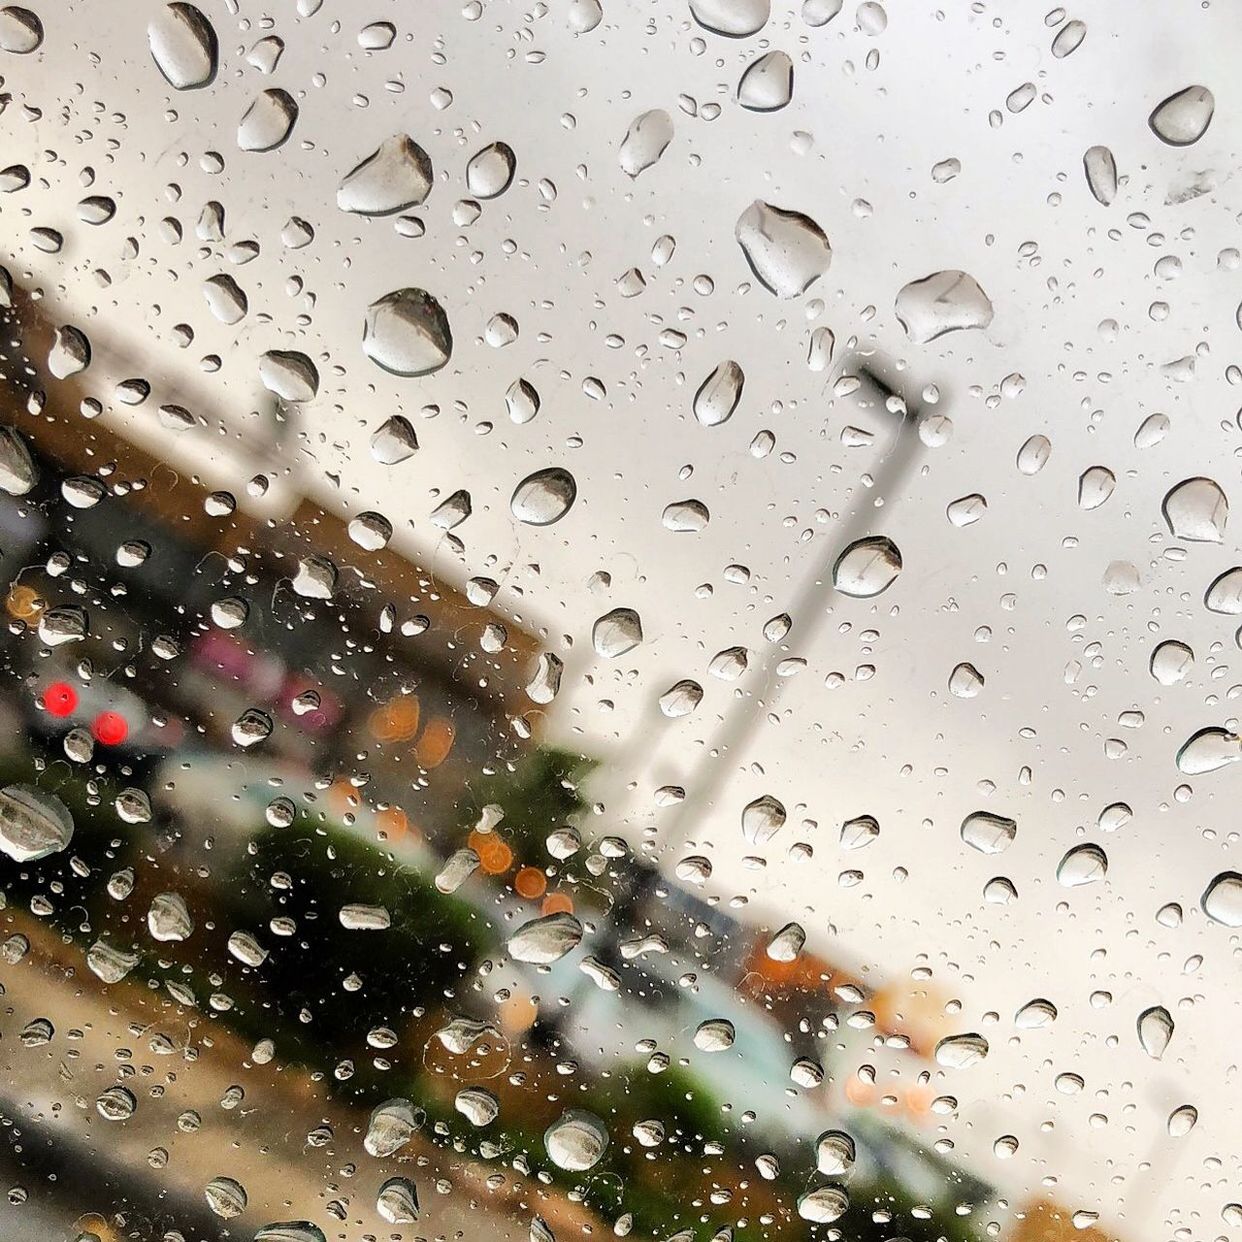 drop, wet, rain, glass - material, water, window, transparent, raindrop, close-up, full frame, no people, indoors, rainy season, nature, day, backgrounds, car, vehicle interior, glass